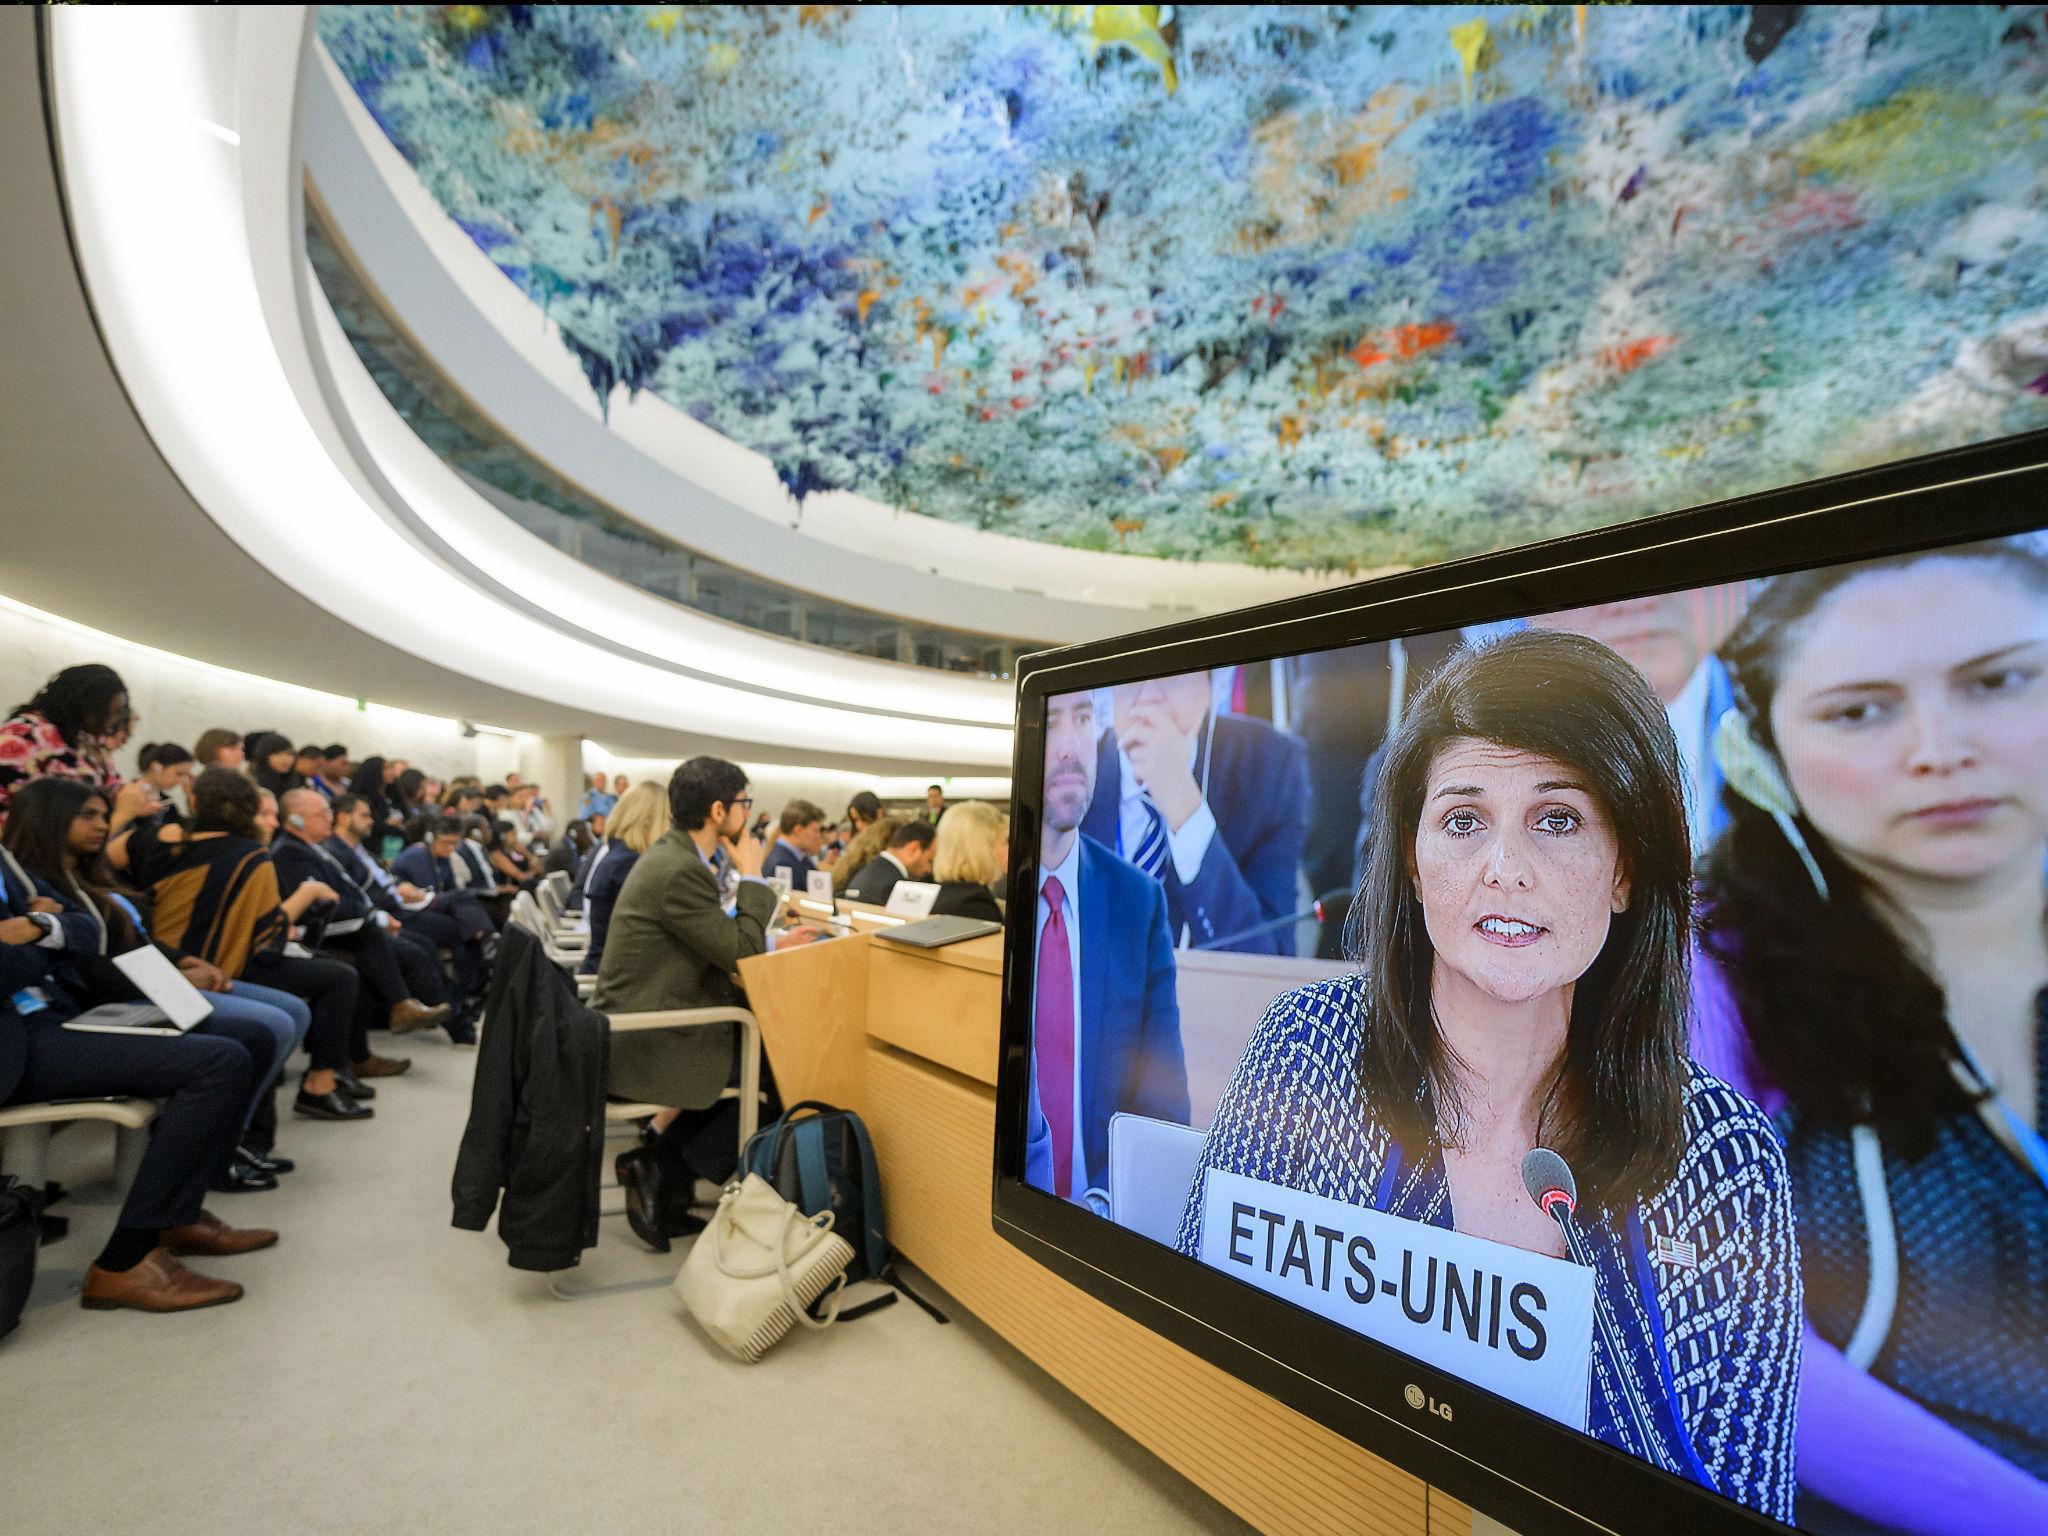 People sit next to a screen showing US Ambassador to the United Nations Nikki Haley addressing the United Nations Human Rights Council on 6 June 2017 in Geneva.